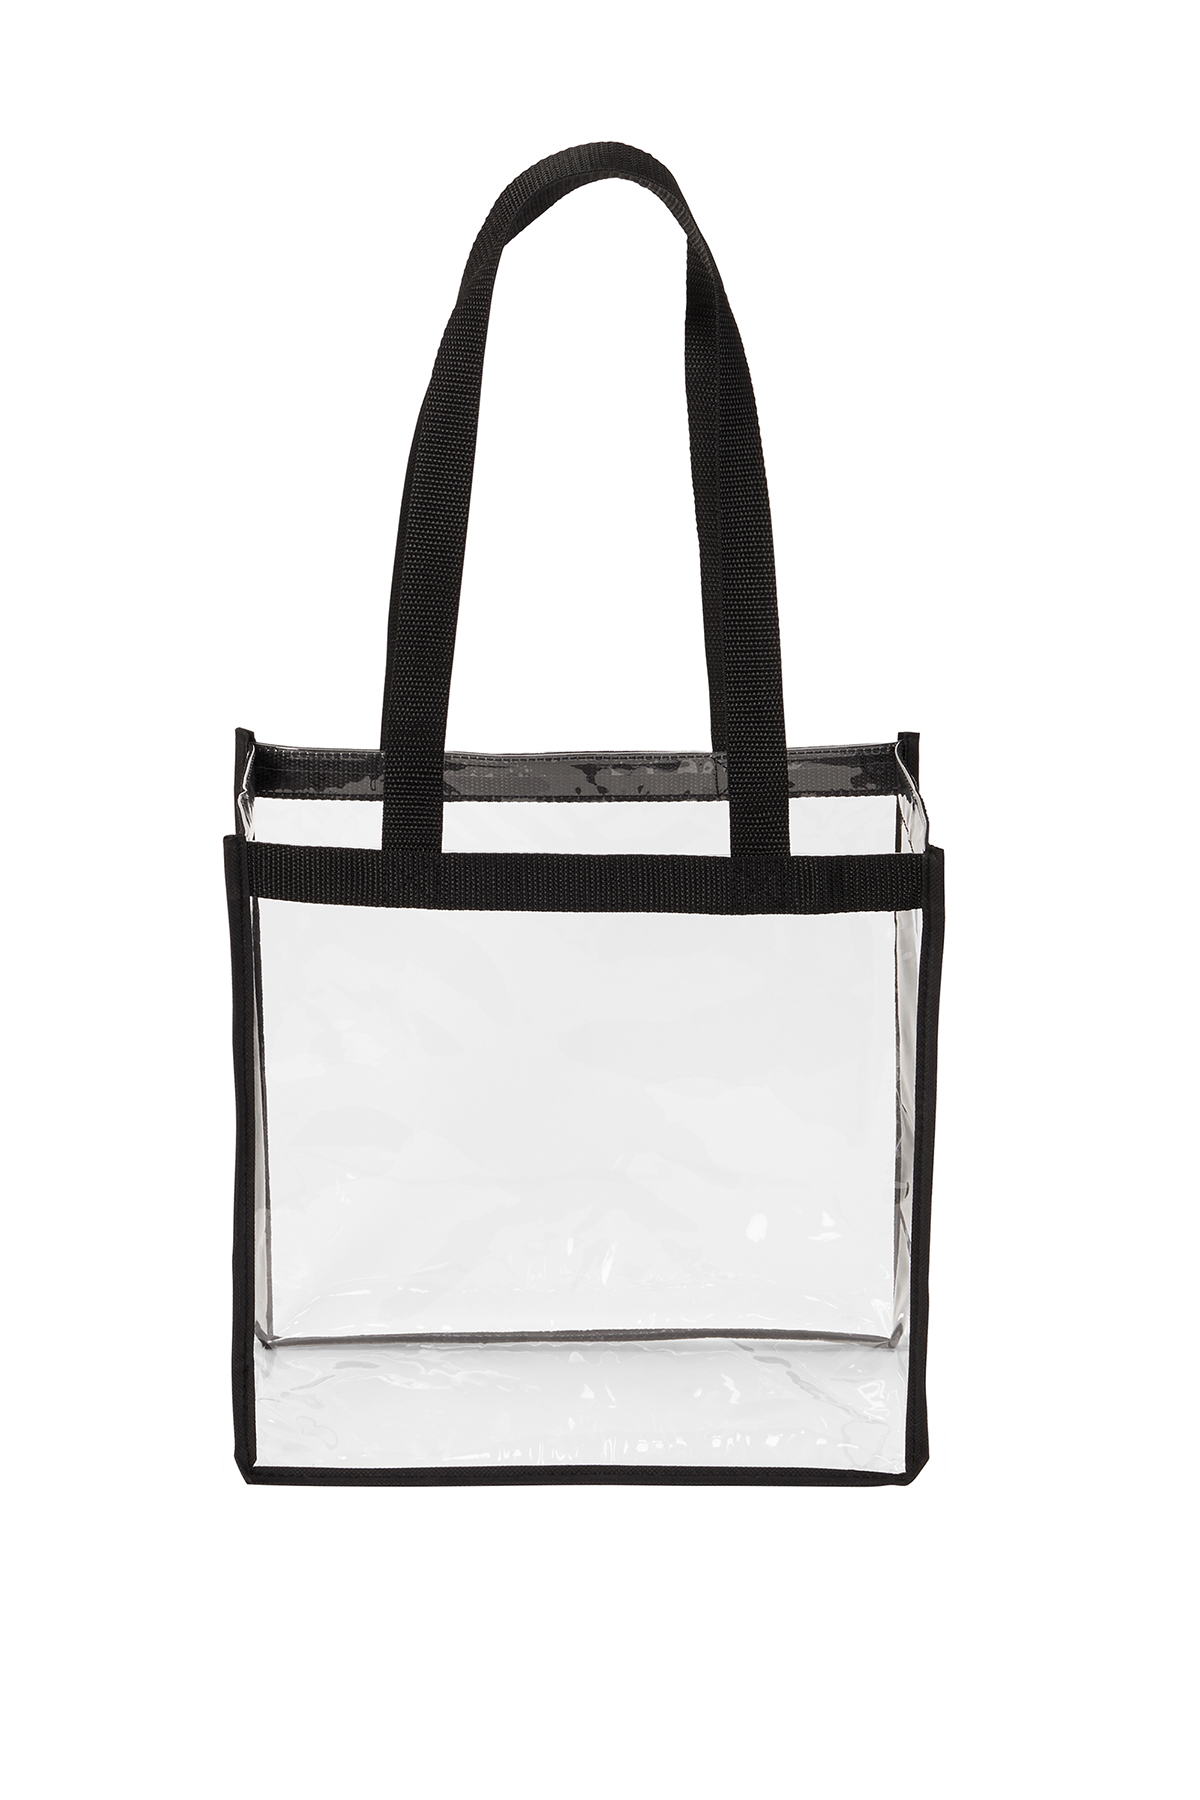 Clear Purse Transparent Handbags For Work Concert NFL Stadium Approved Clear  Bags See Through PVC Plastic Bag Top Handle Satchel - Buy Clear Purse  Transparent Handbags For Work Concert NFL Stadium Approved